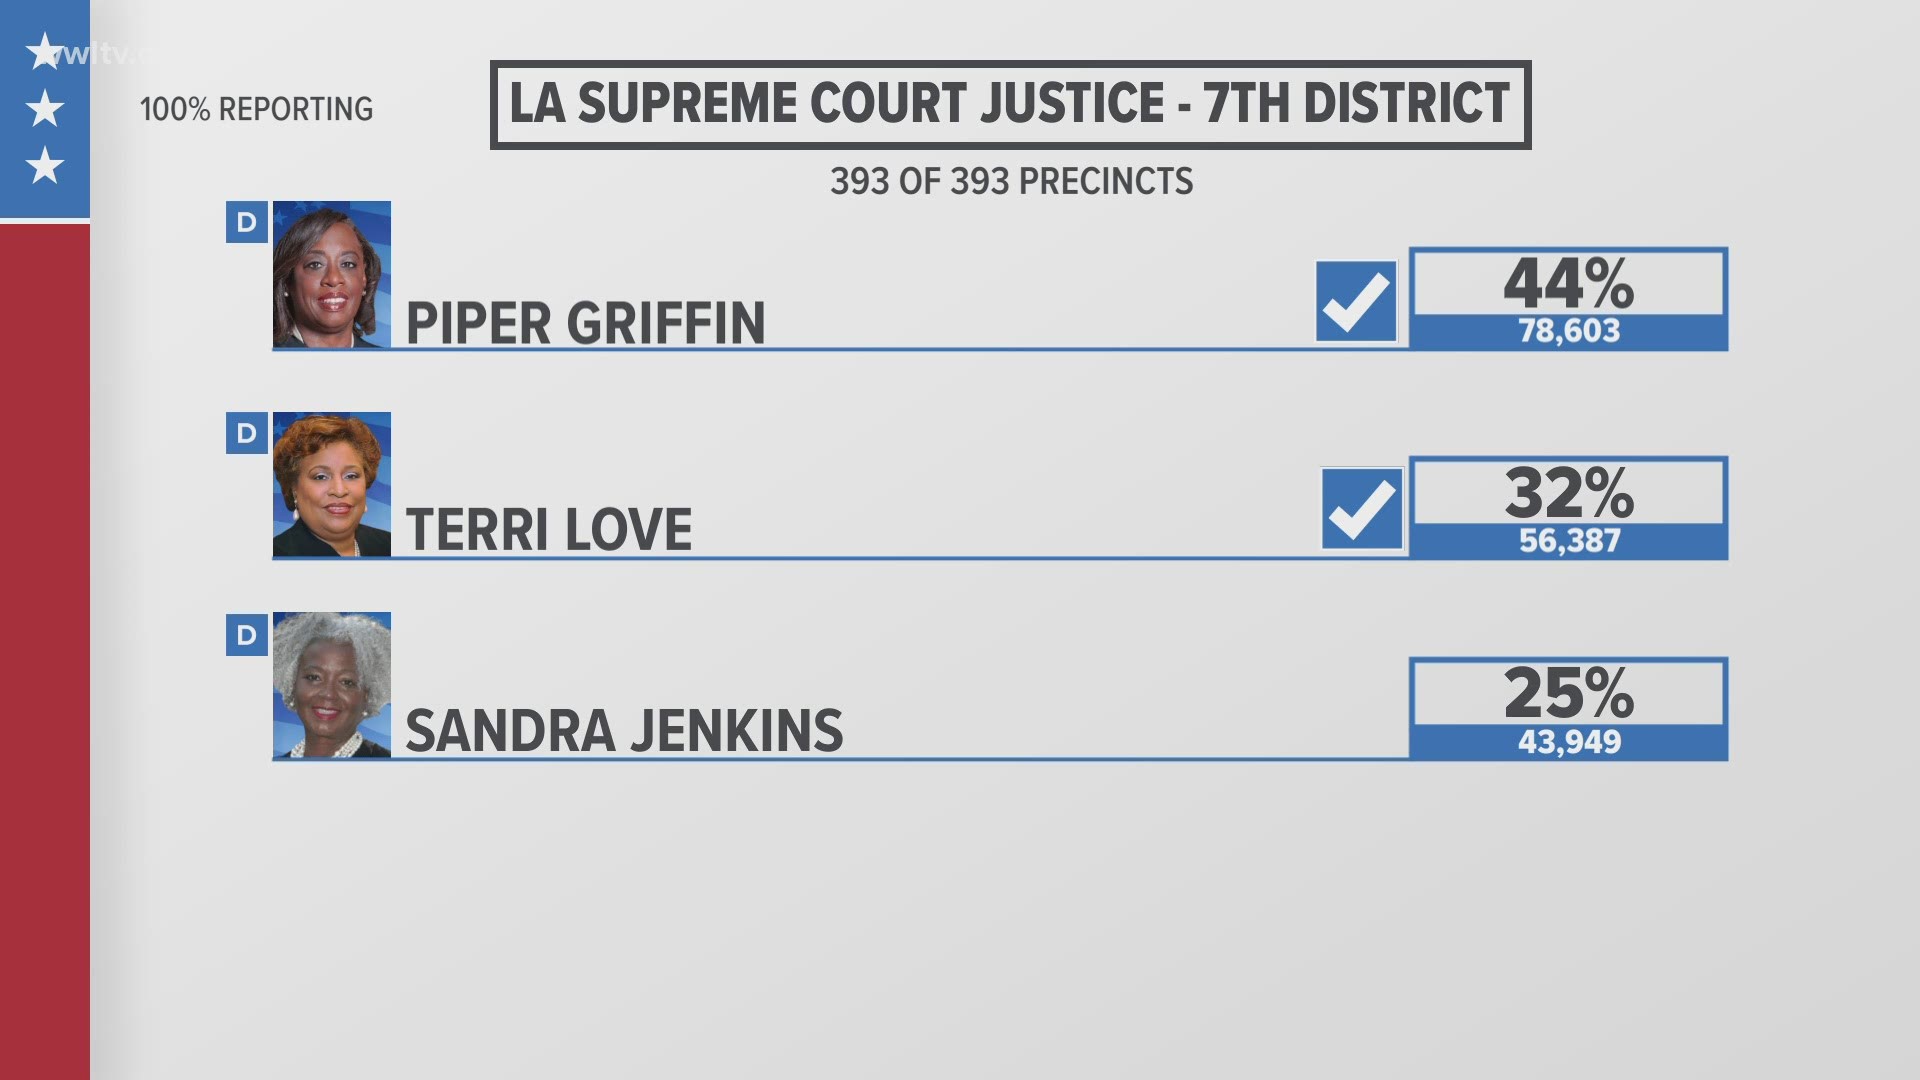 Appellate court Judge Terri Love announced Friday that she is dropping out of the race.